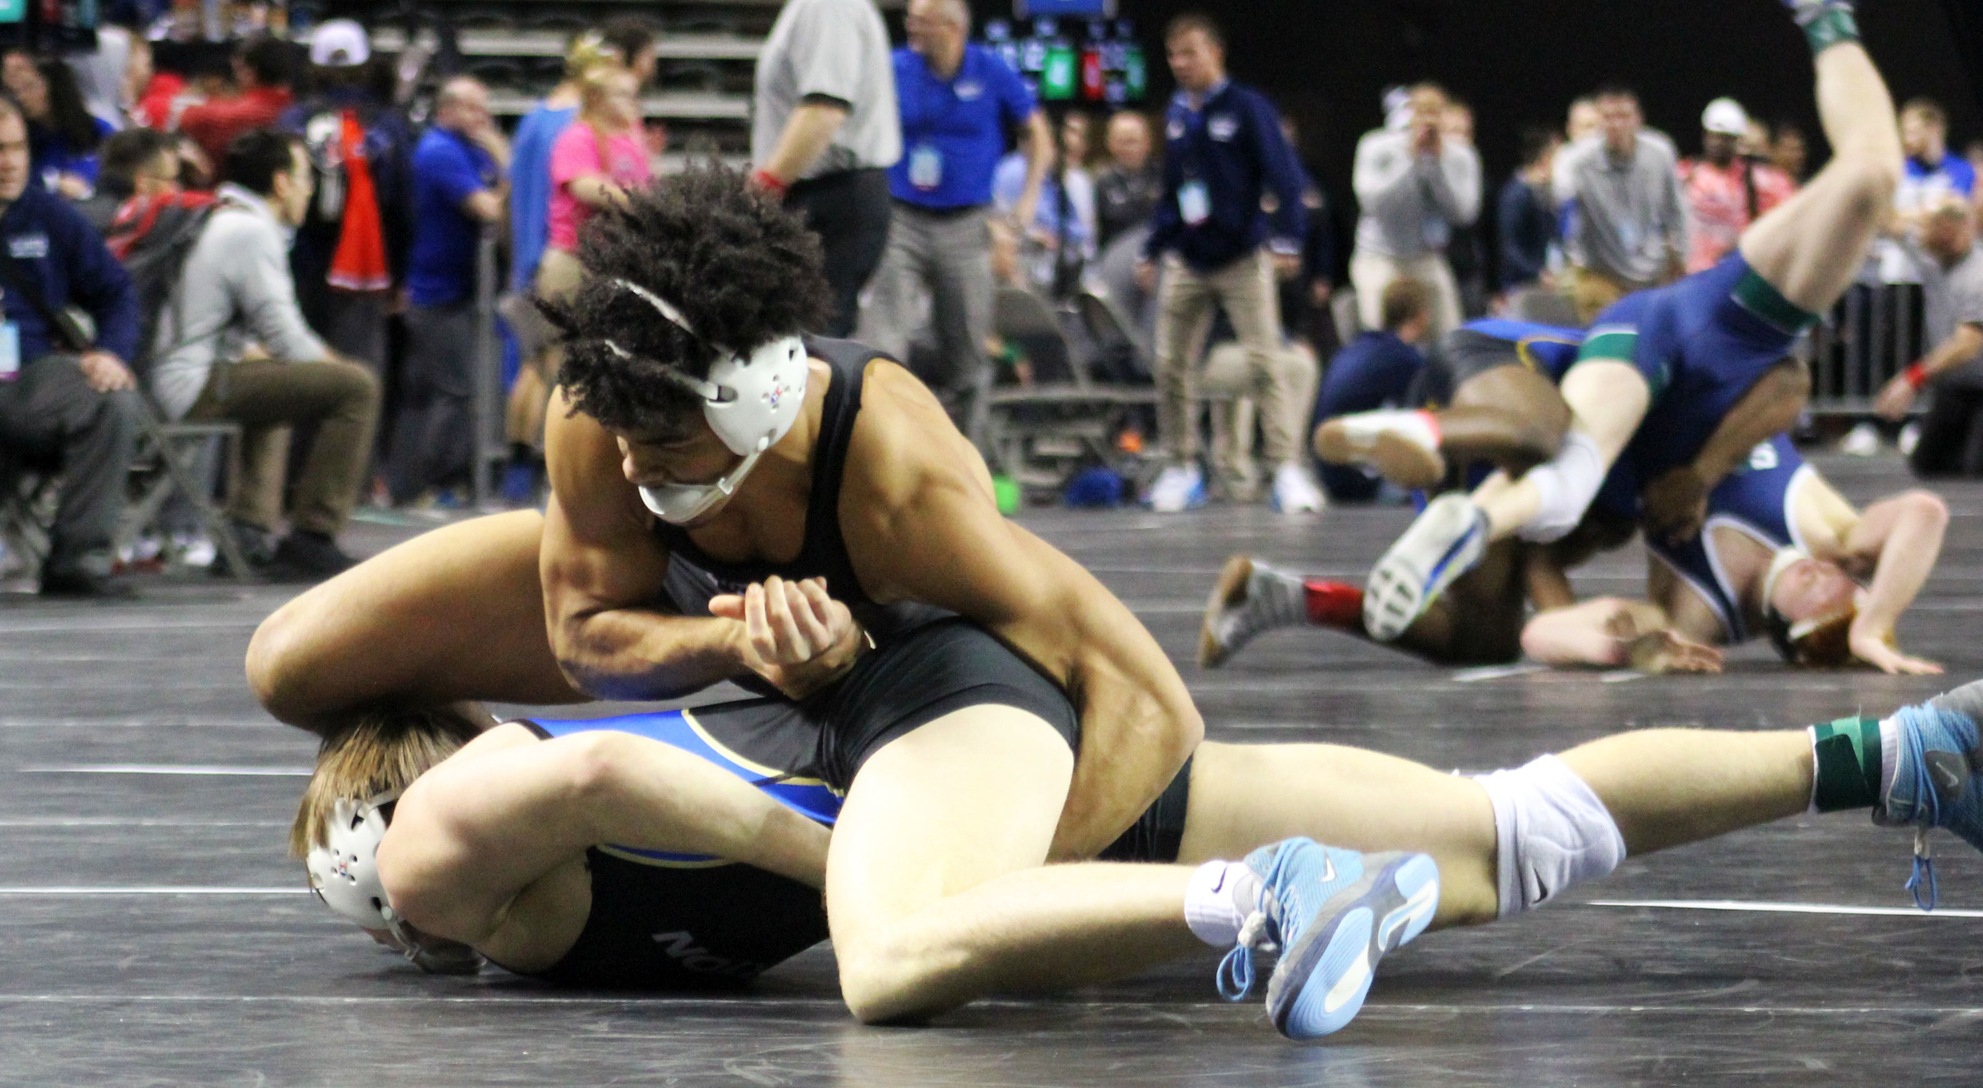 NIACC's Christian Minto controls Barton's Andrew Dearmond in a 165-pound match at the national tournament on Friday.